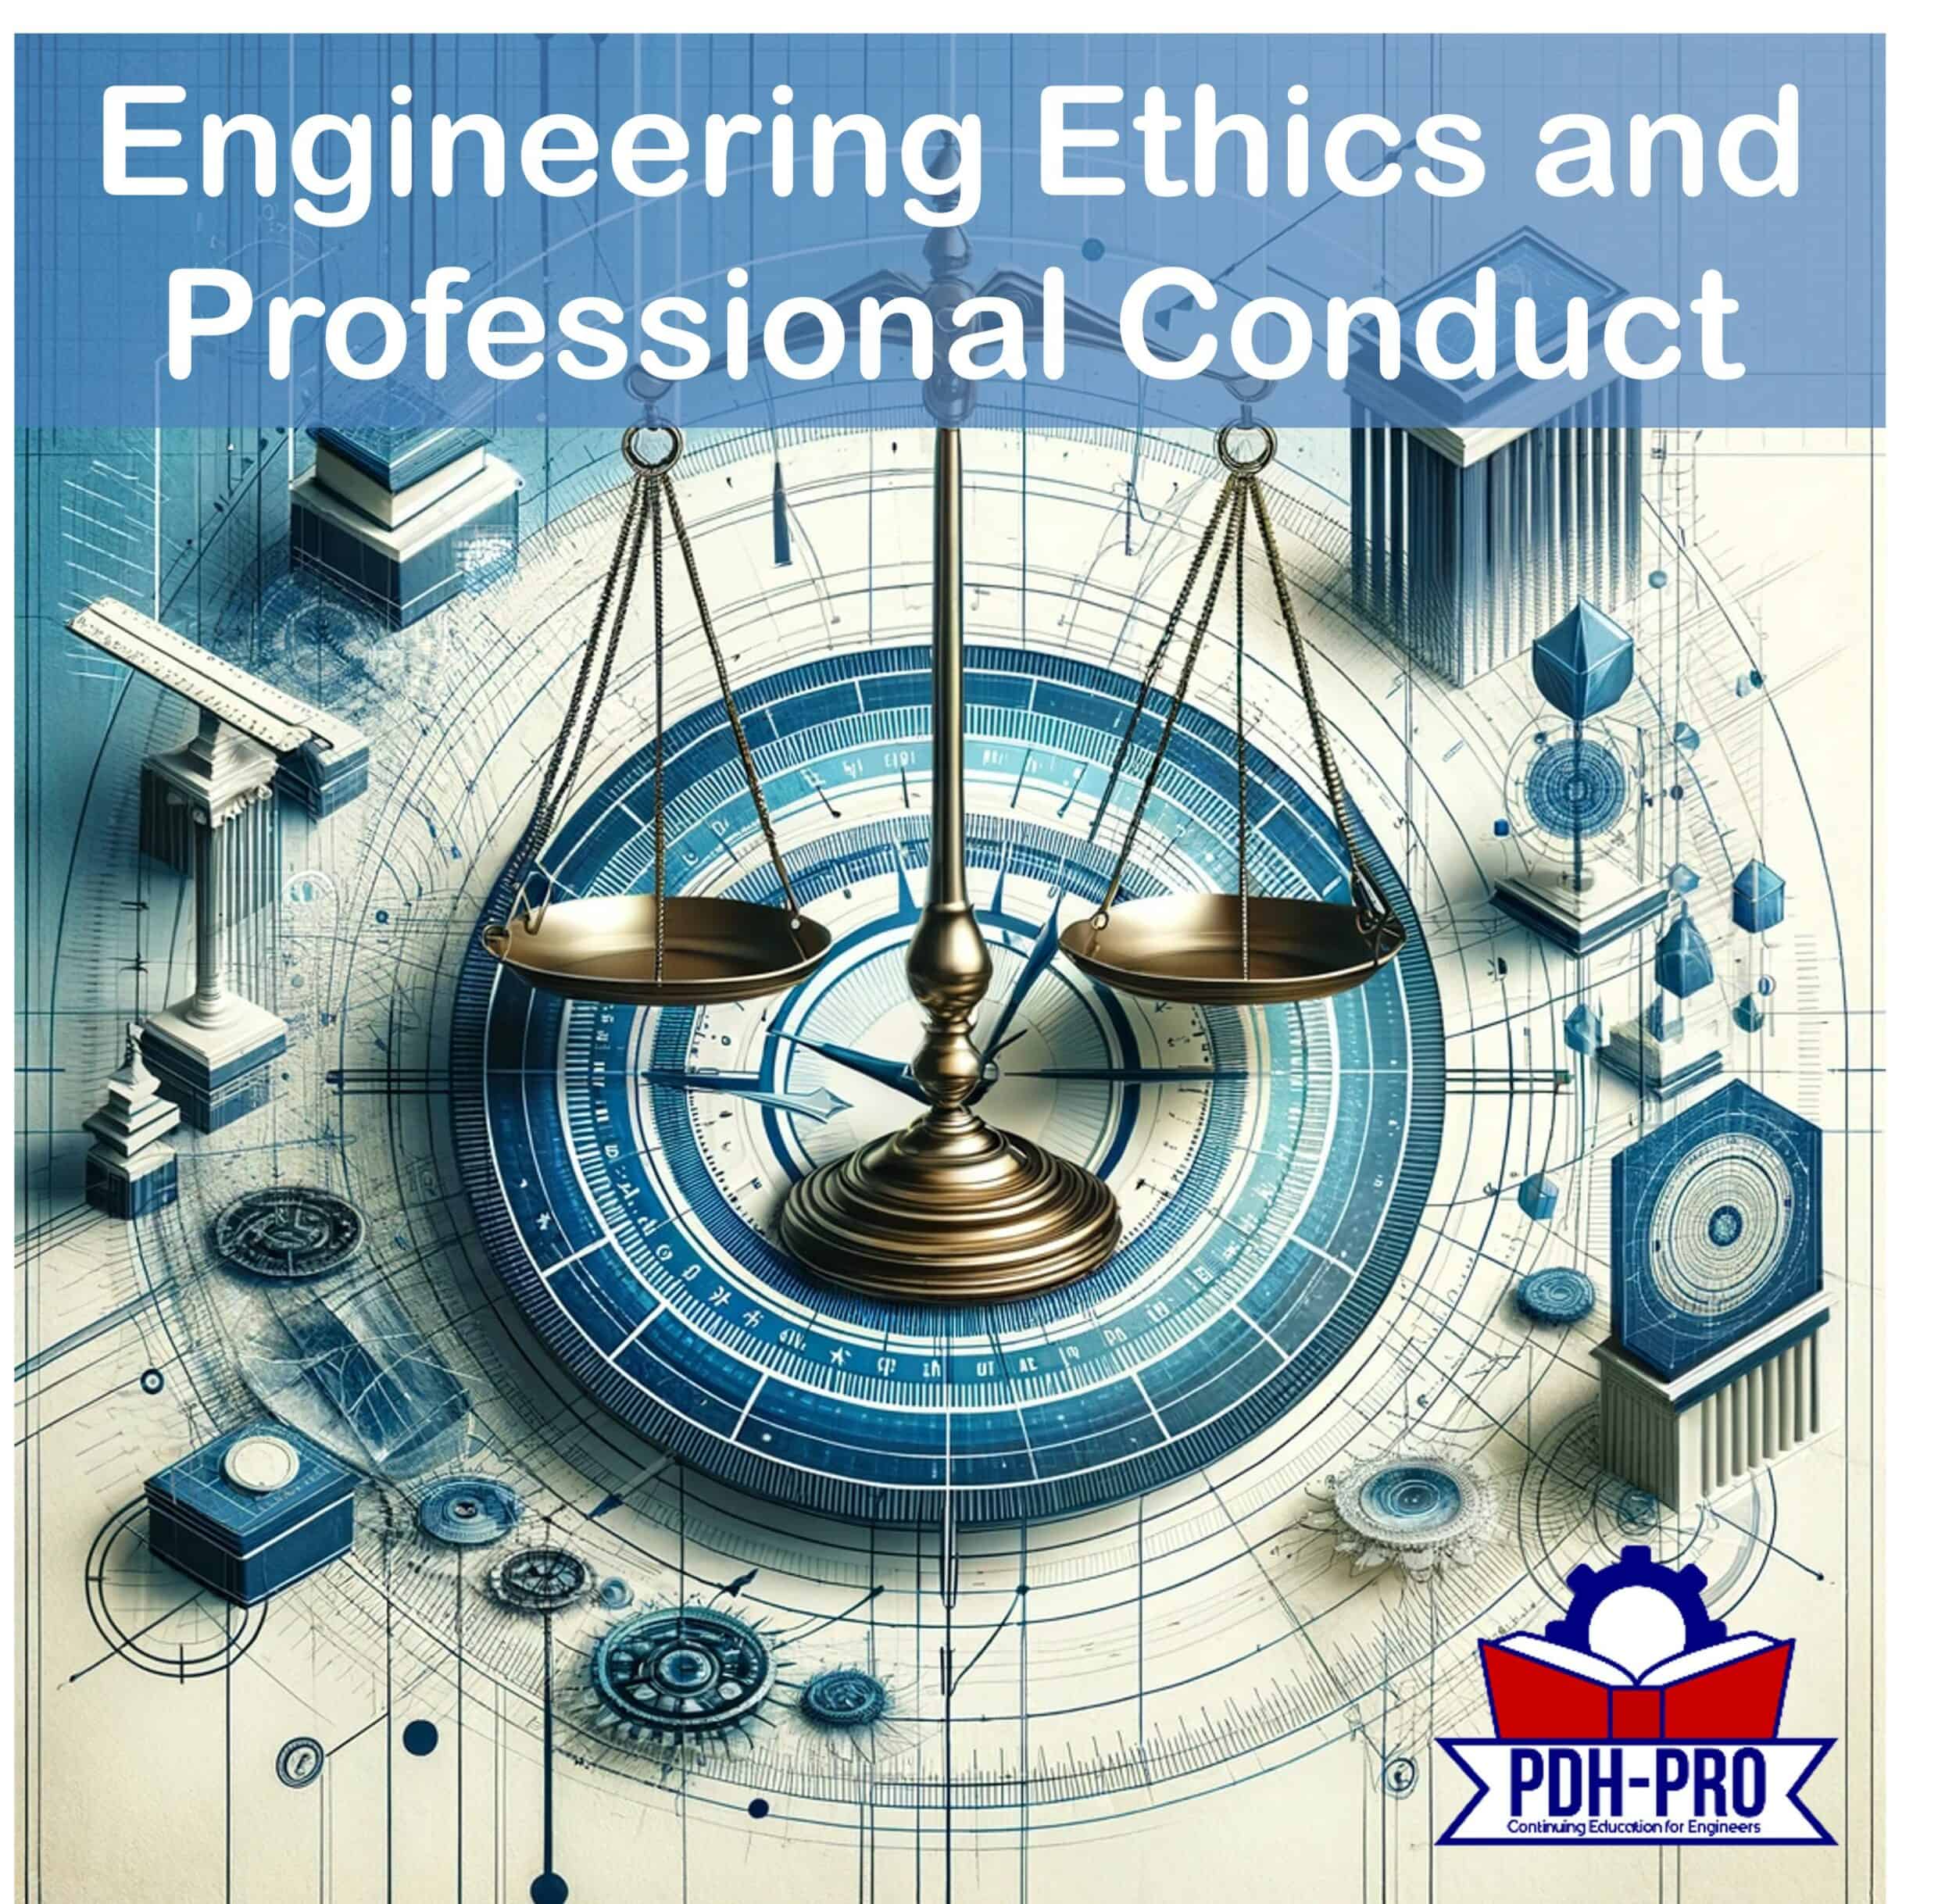 Engineering Ethics and Professional Conduct